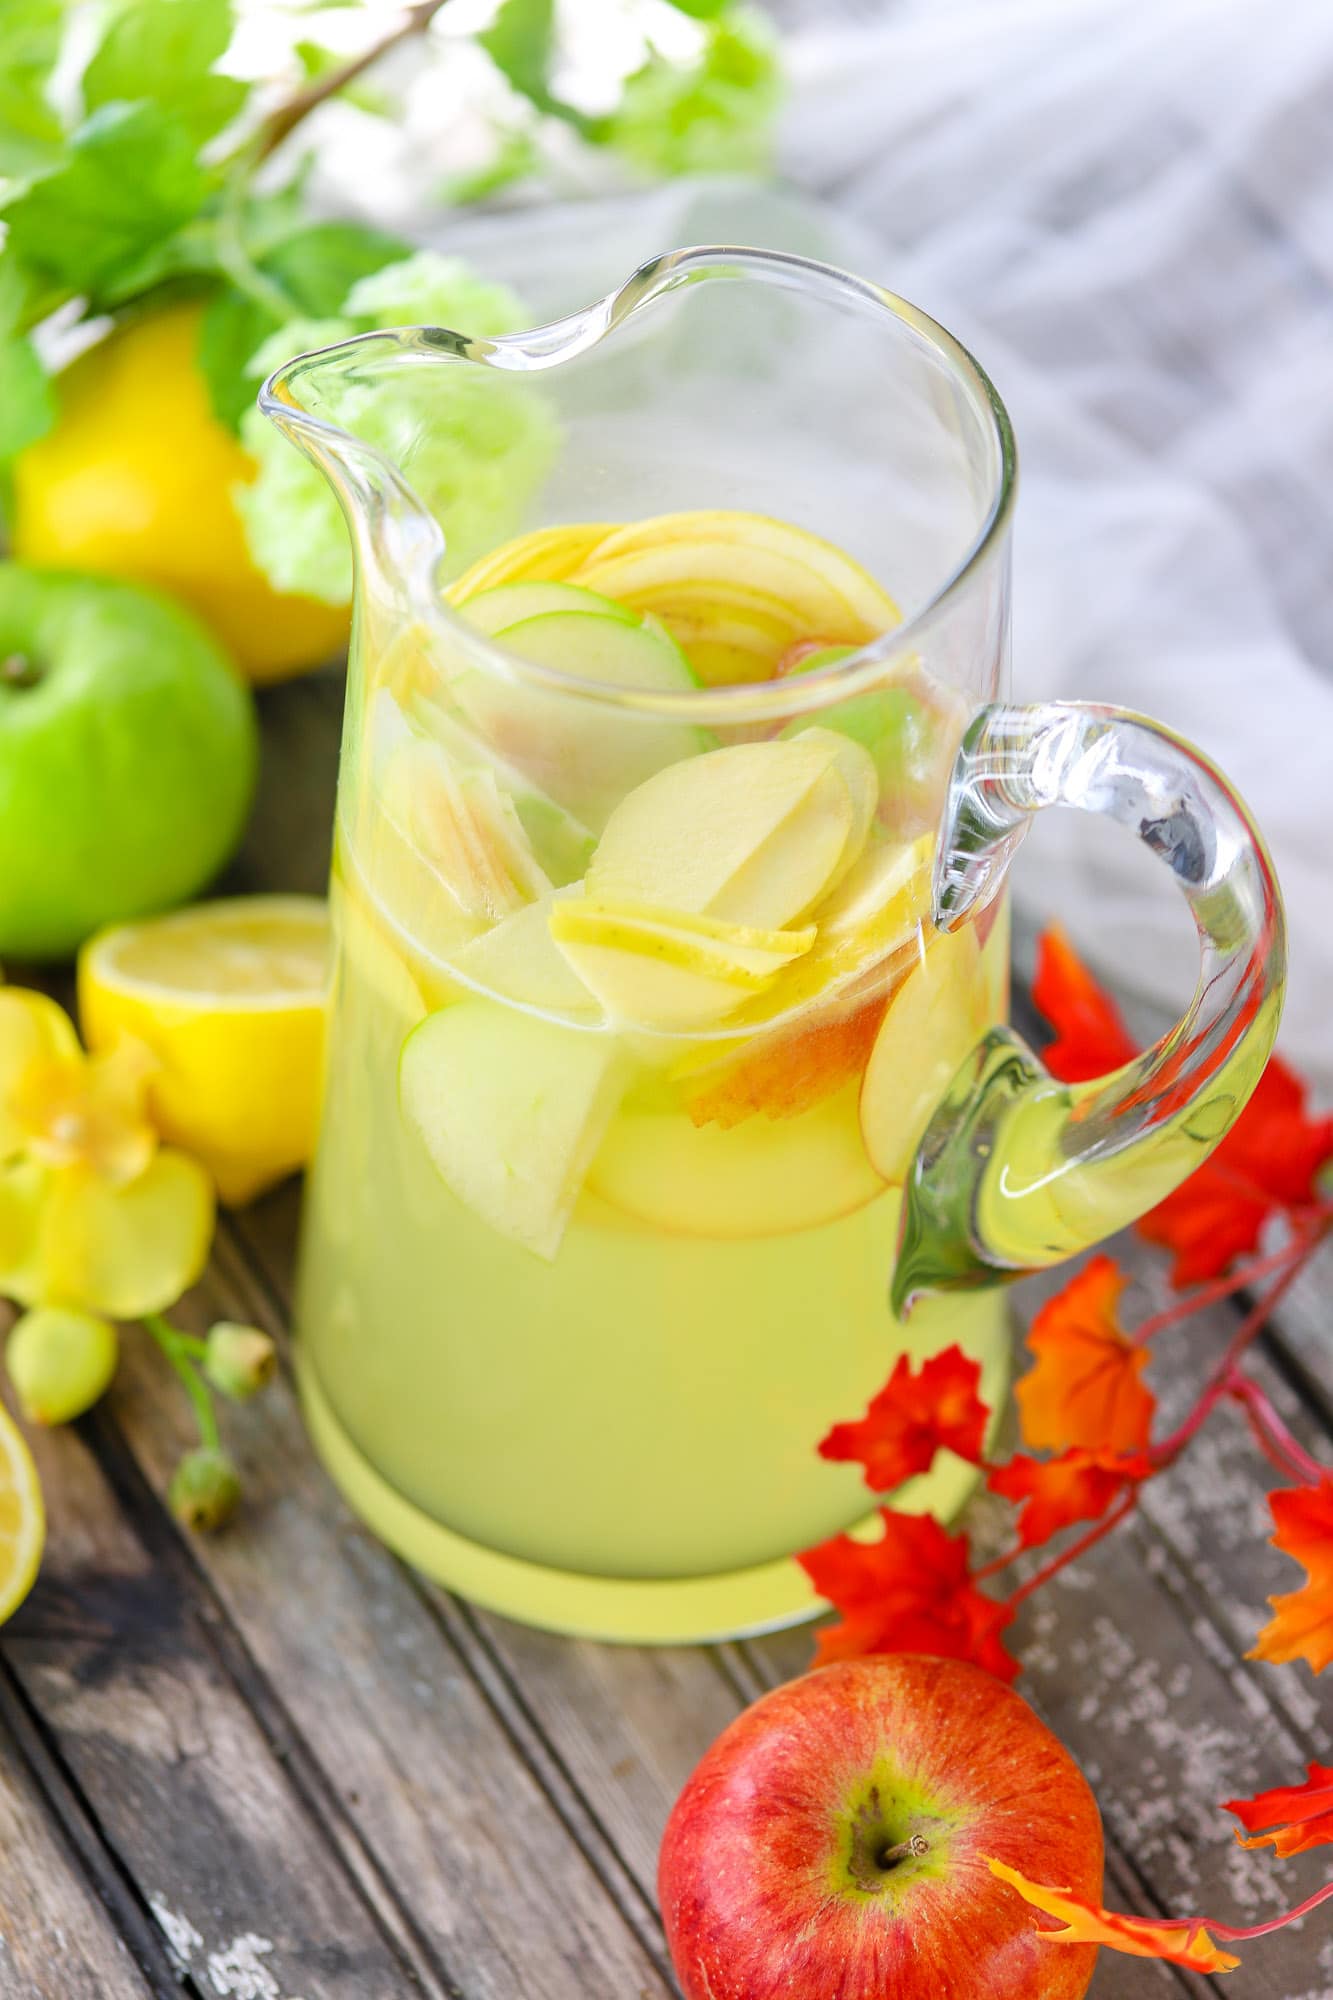 clear glass pitcher full of lemonade and apple slices surrounded by apples and lemons